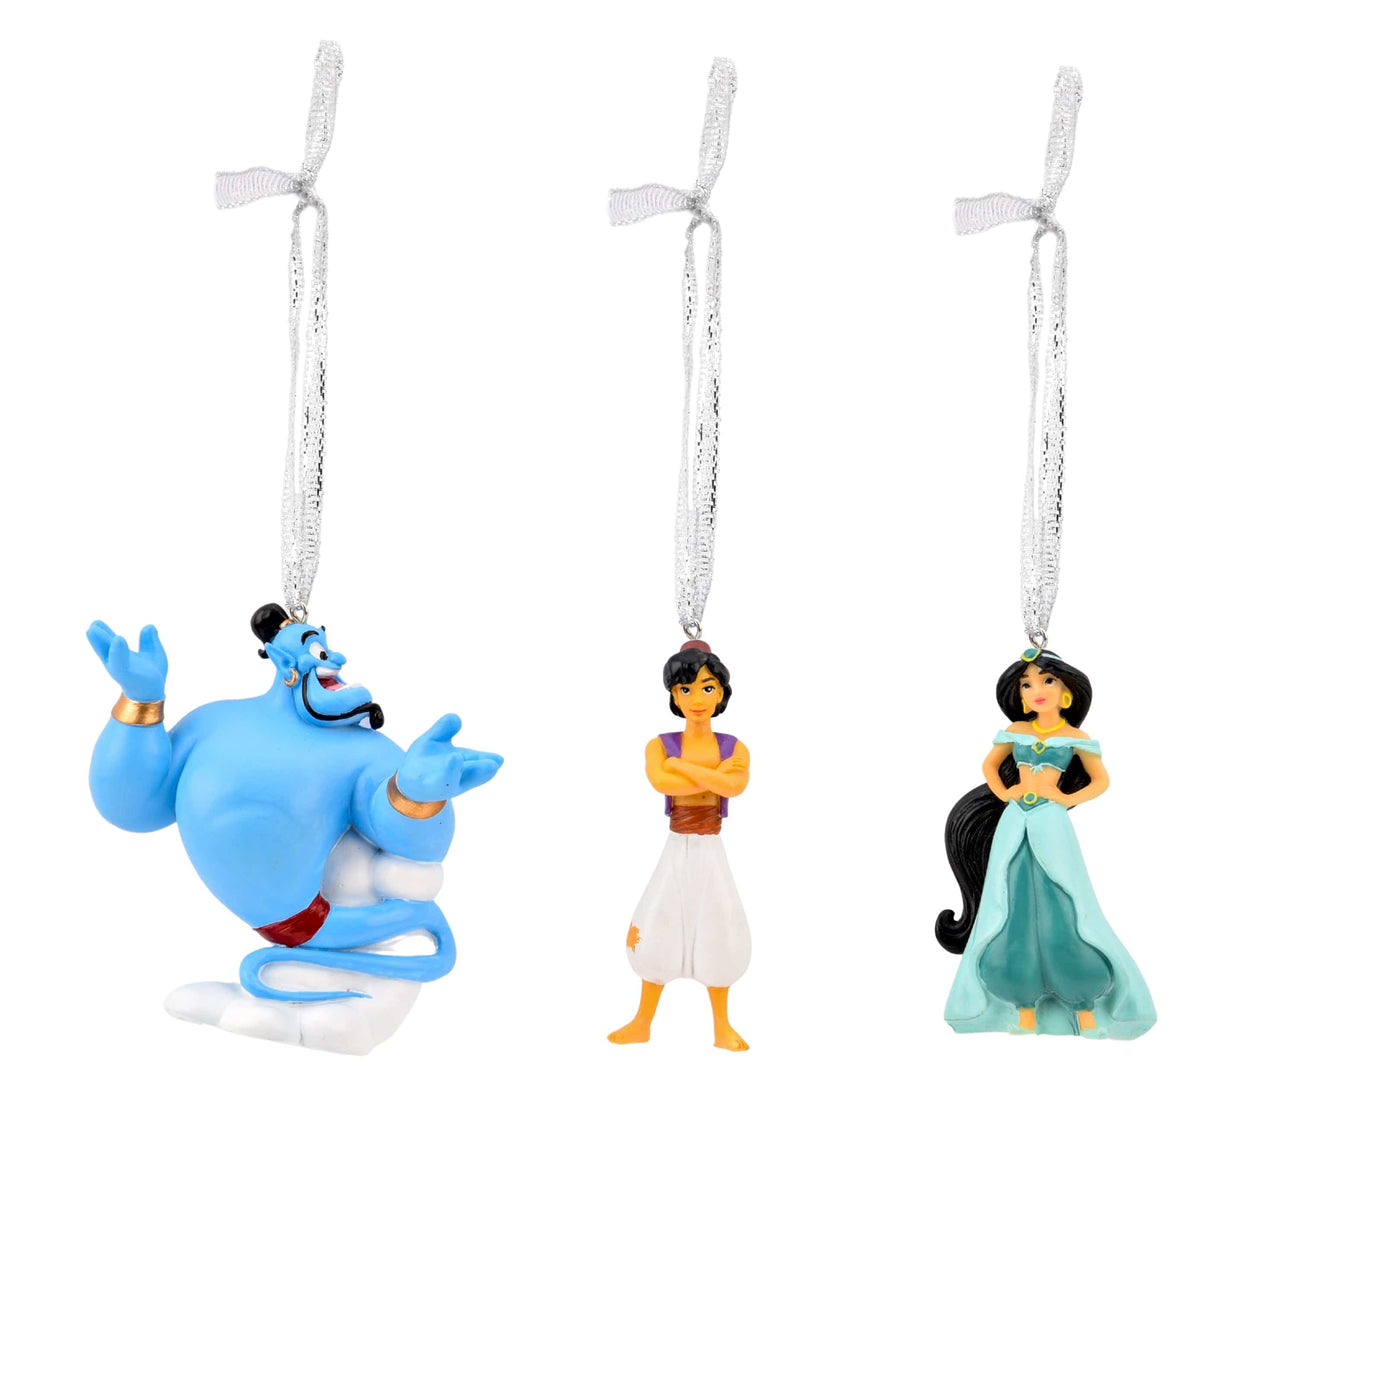 Widdop Gifts Christmas Decorations Set of Three Disney Aladdin Christmas Tree Decorations